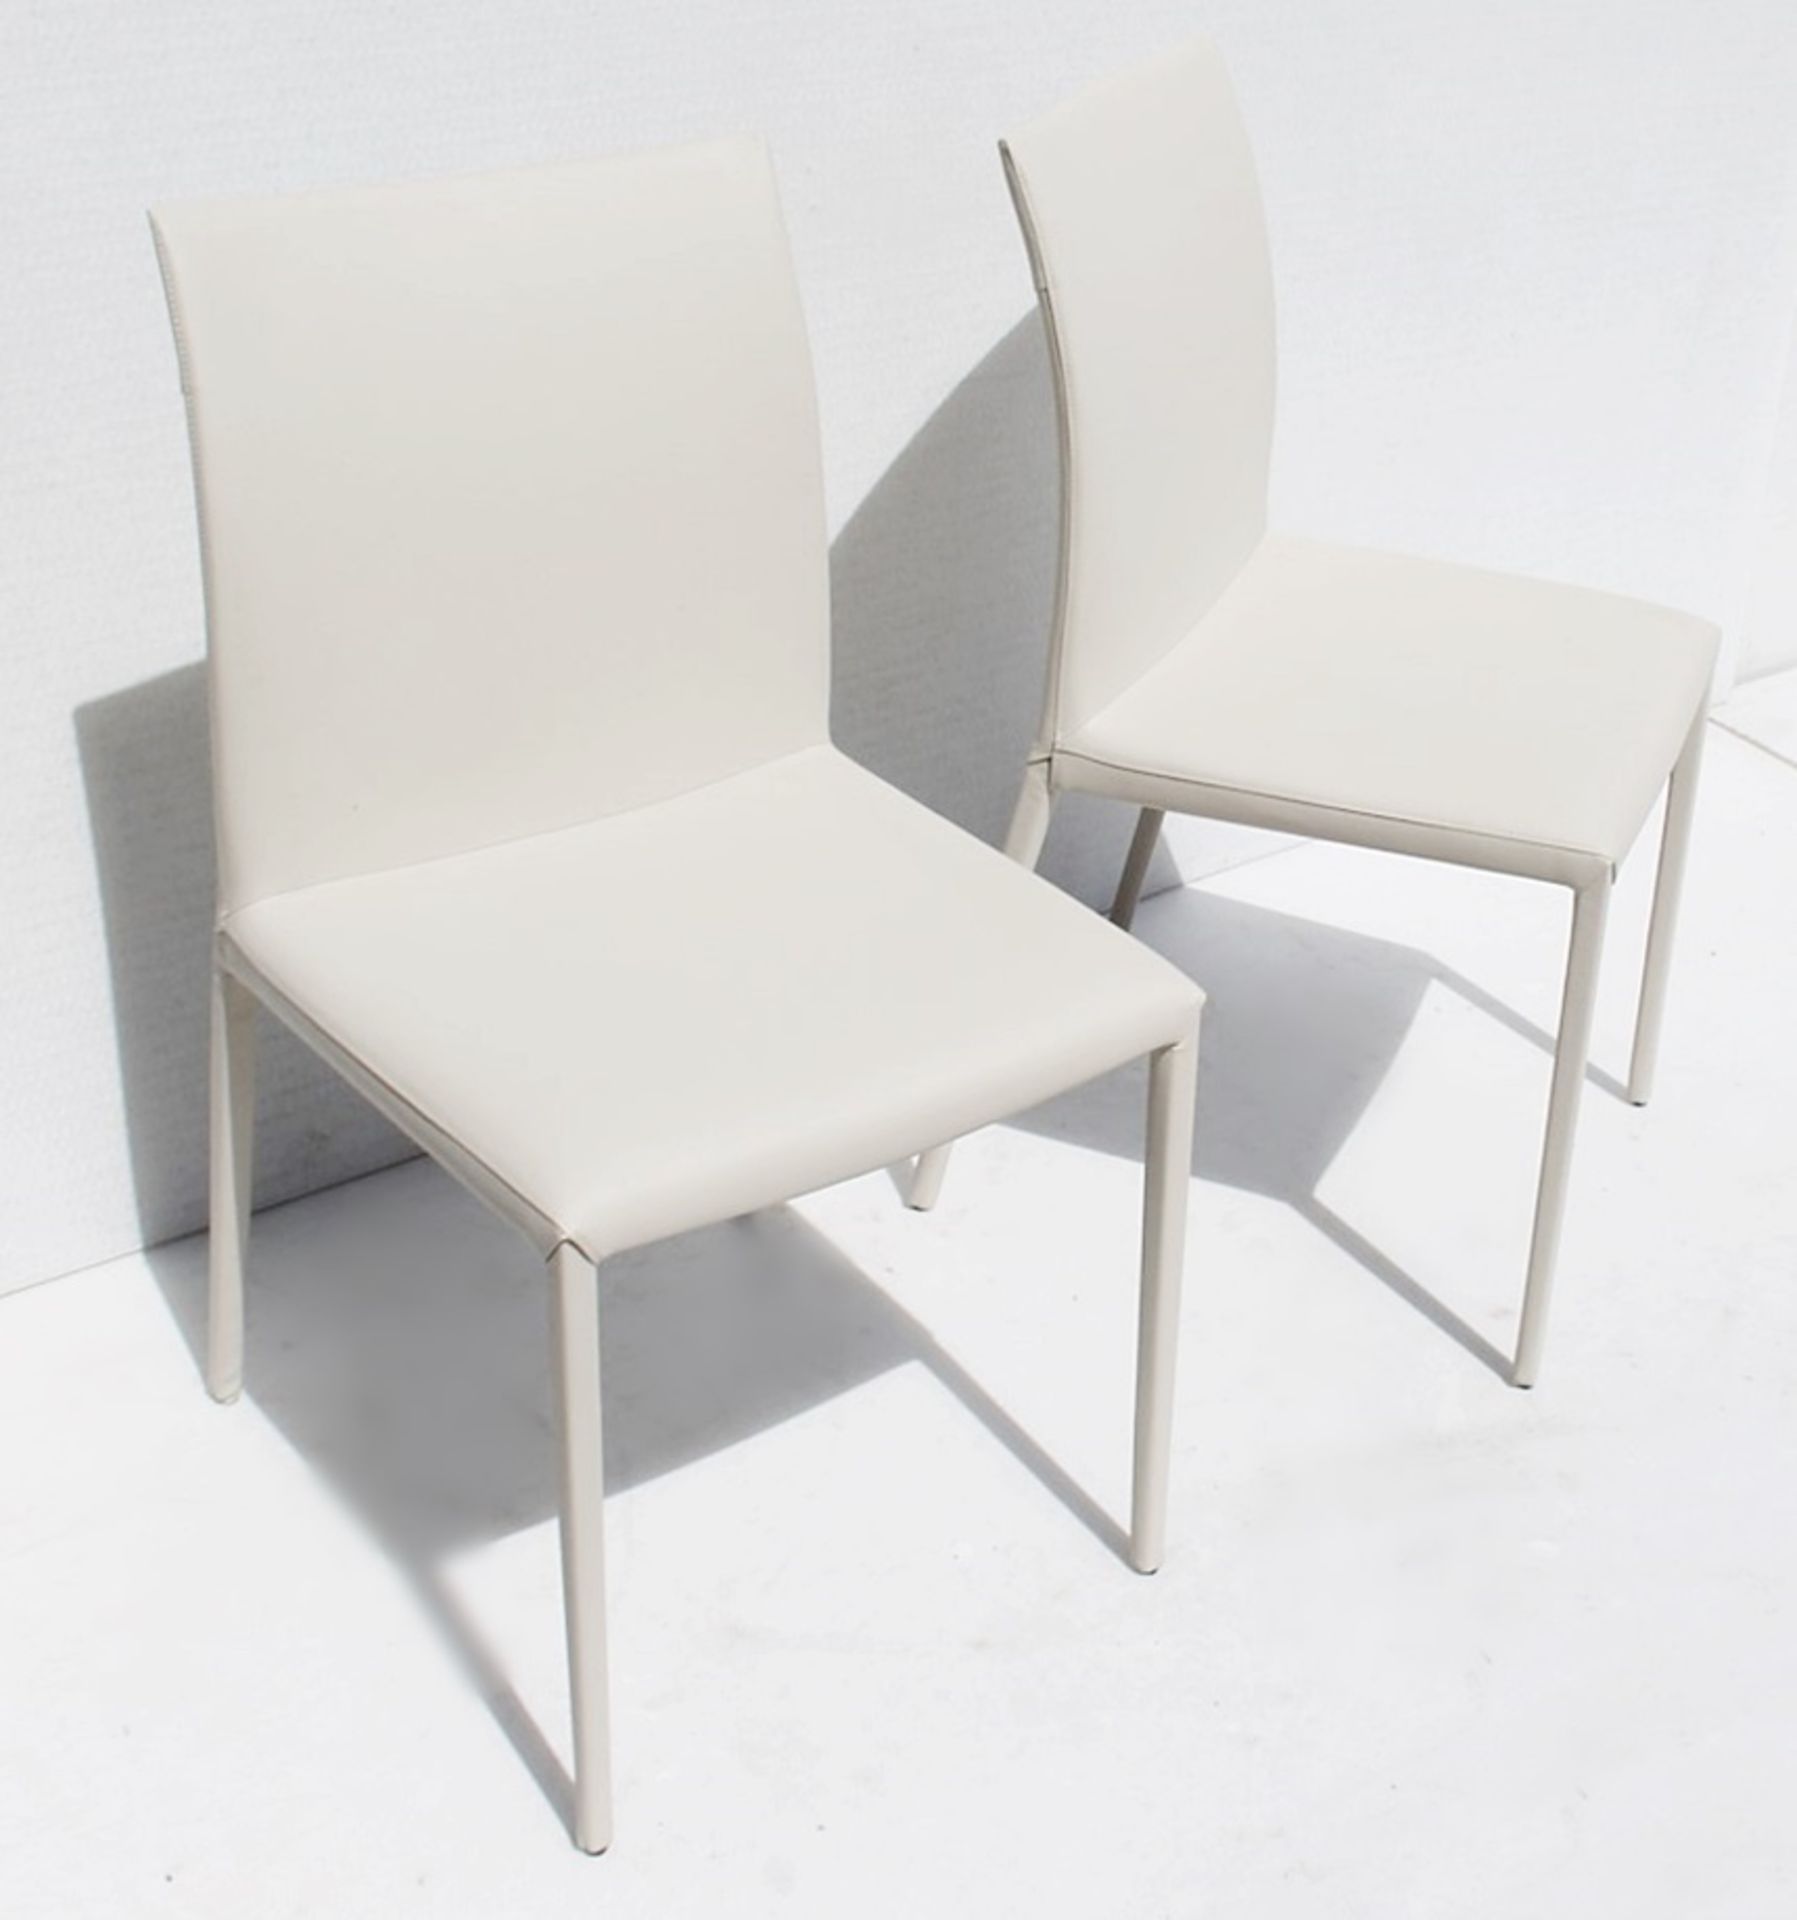 Pair Of CATELLAN 'Norma' Designer Italian Leather Barstools With Curved Backs In A Pale Taupe - - Image 2 of 6